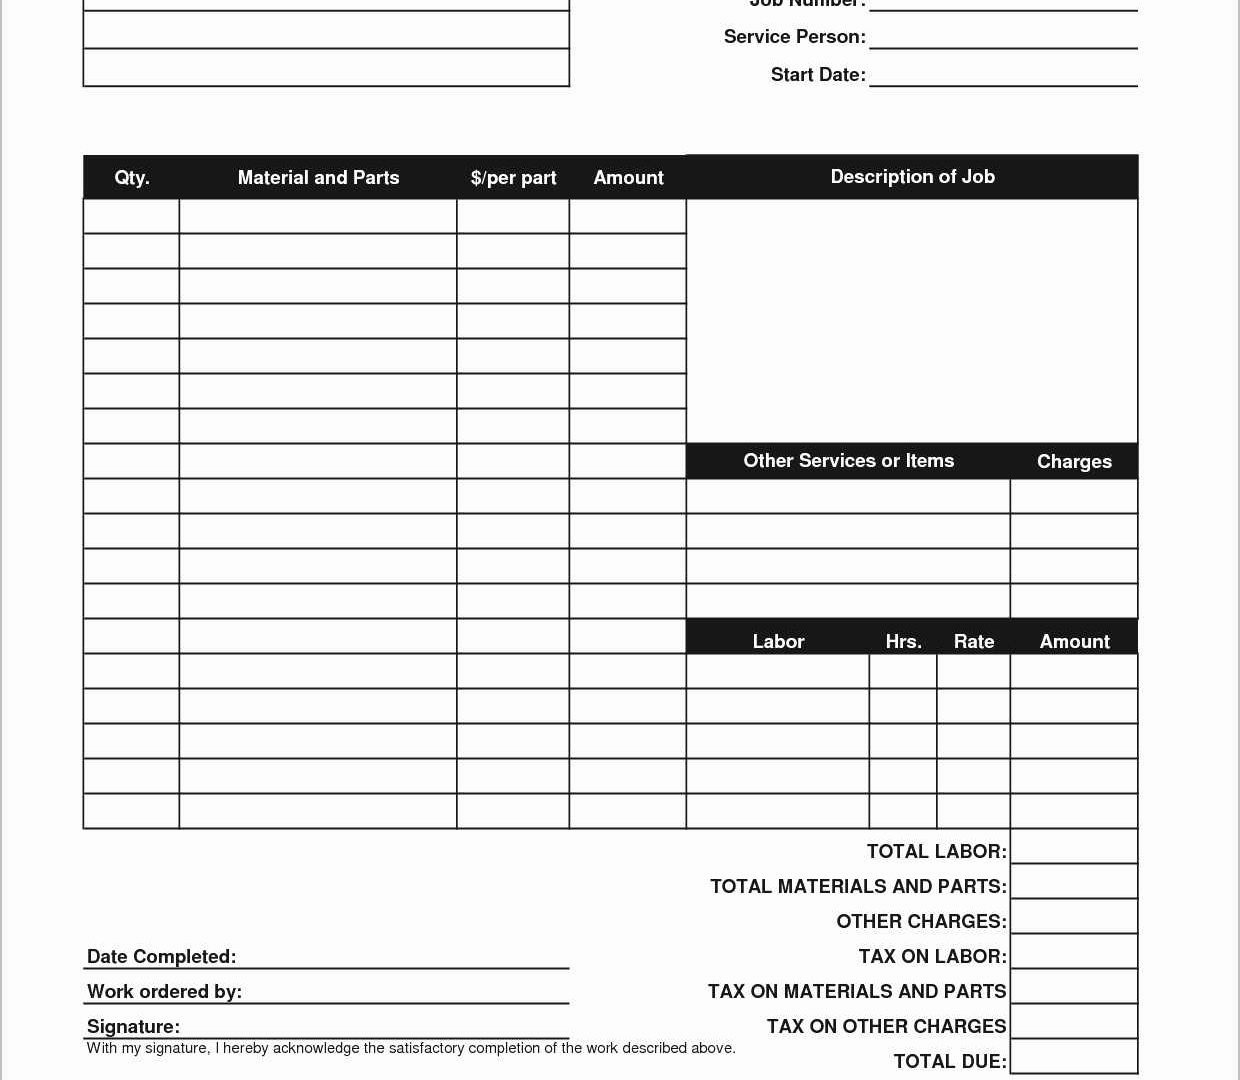 Lawn Service Invoice Template Excel Luxury Services Invoice Template Excel Simple Service Lawn Legal